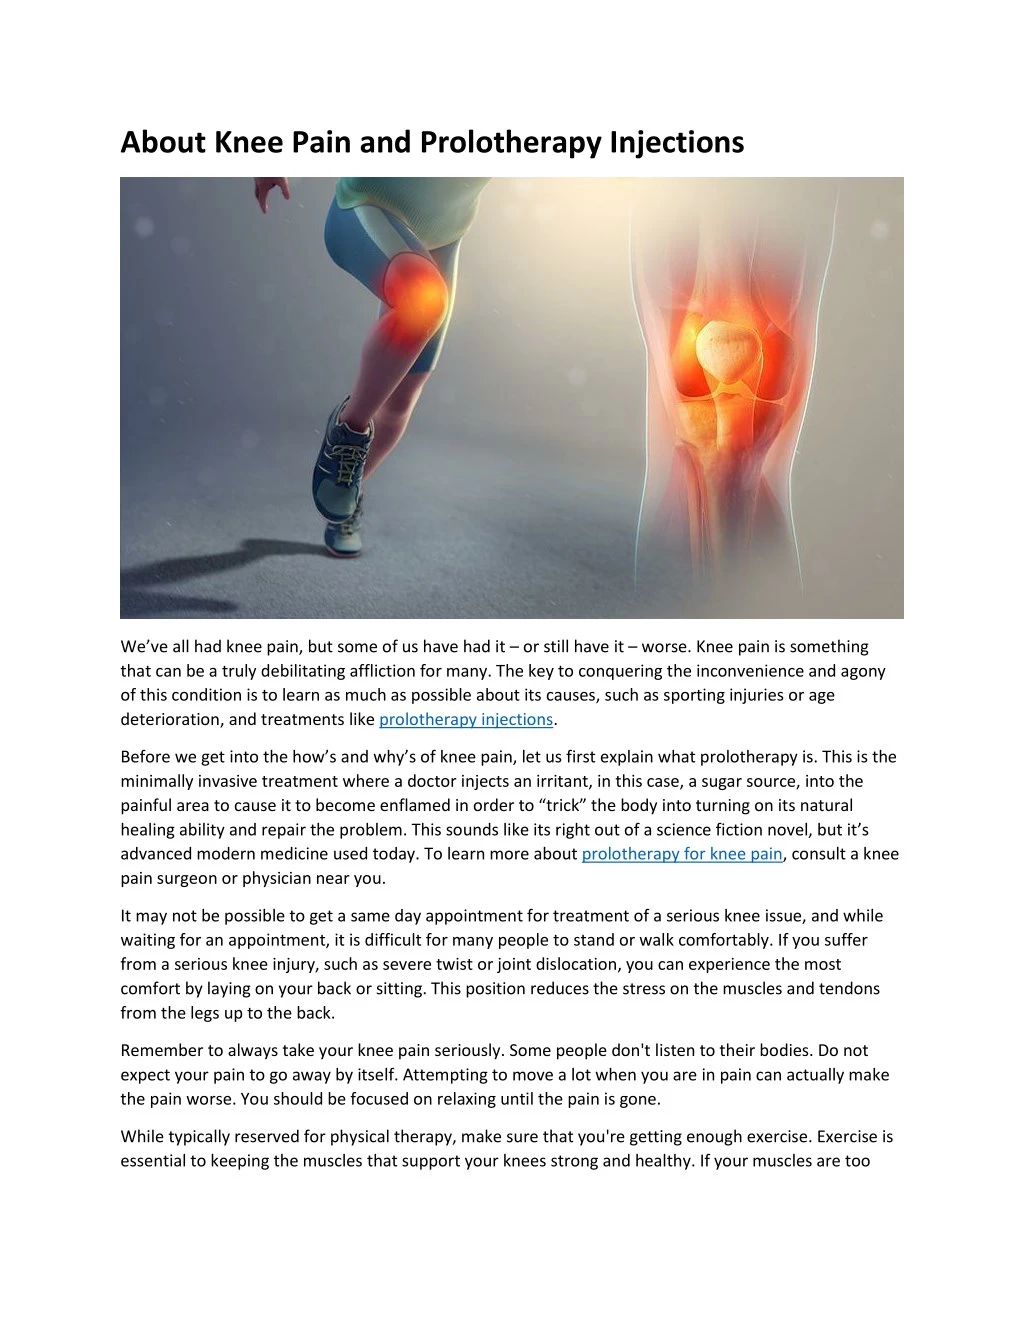 about knee pain and prolotherapy injections